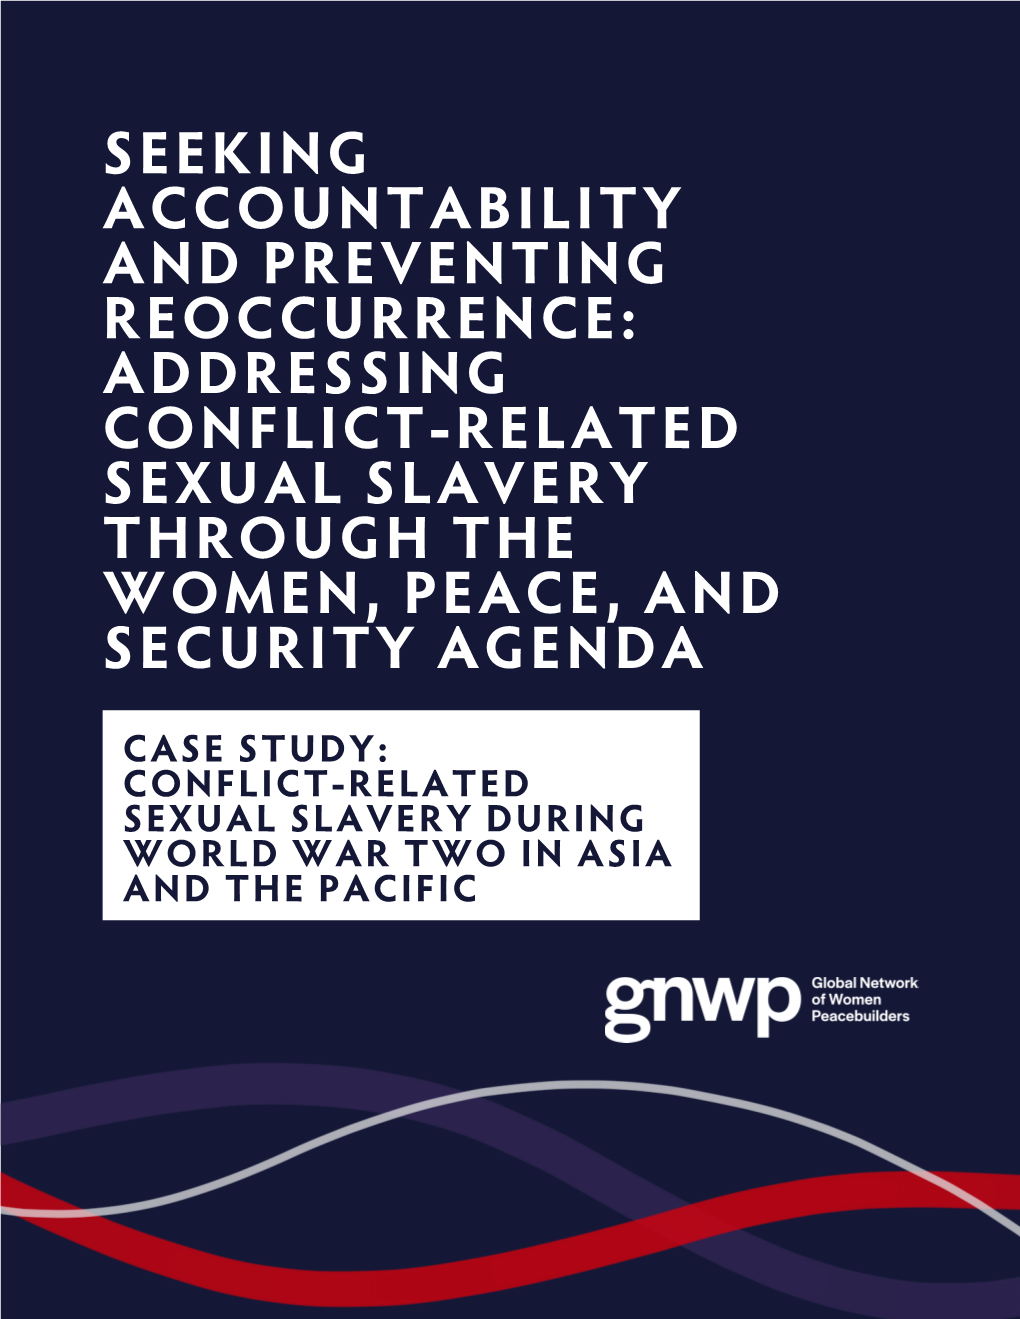 Addressing Conflict-Related Sexual Slavery Through the Women, Peace, and Security Agenda